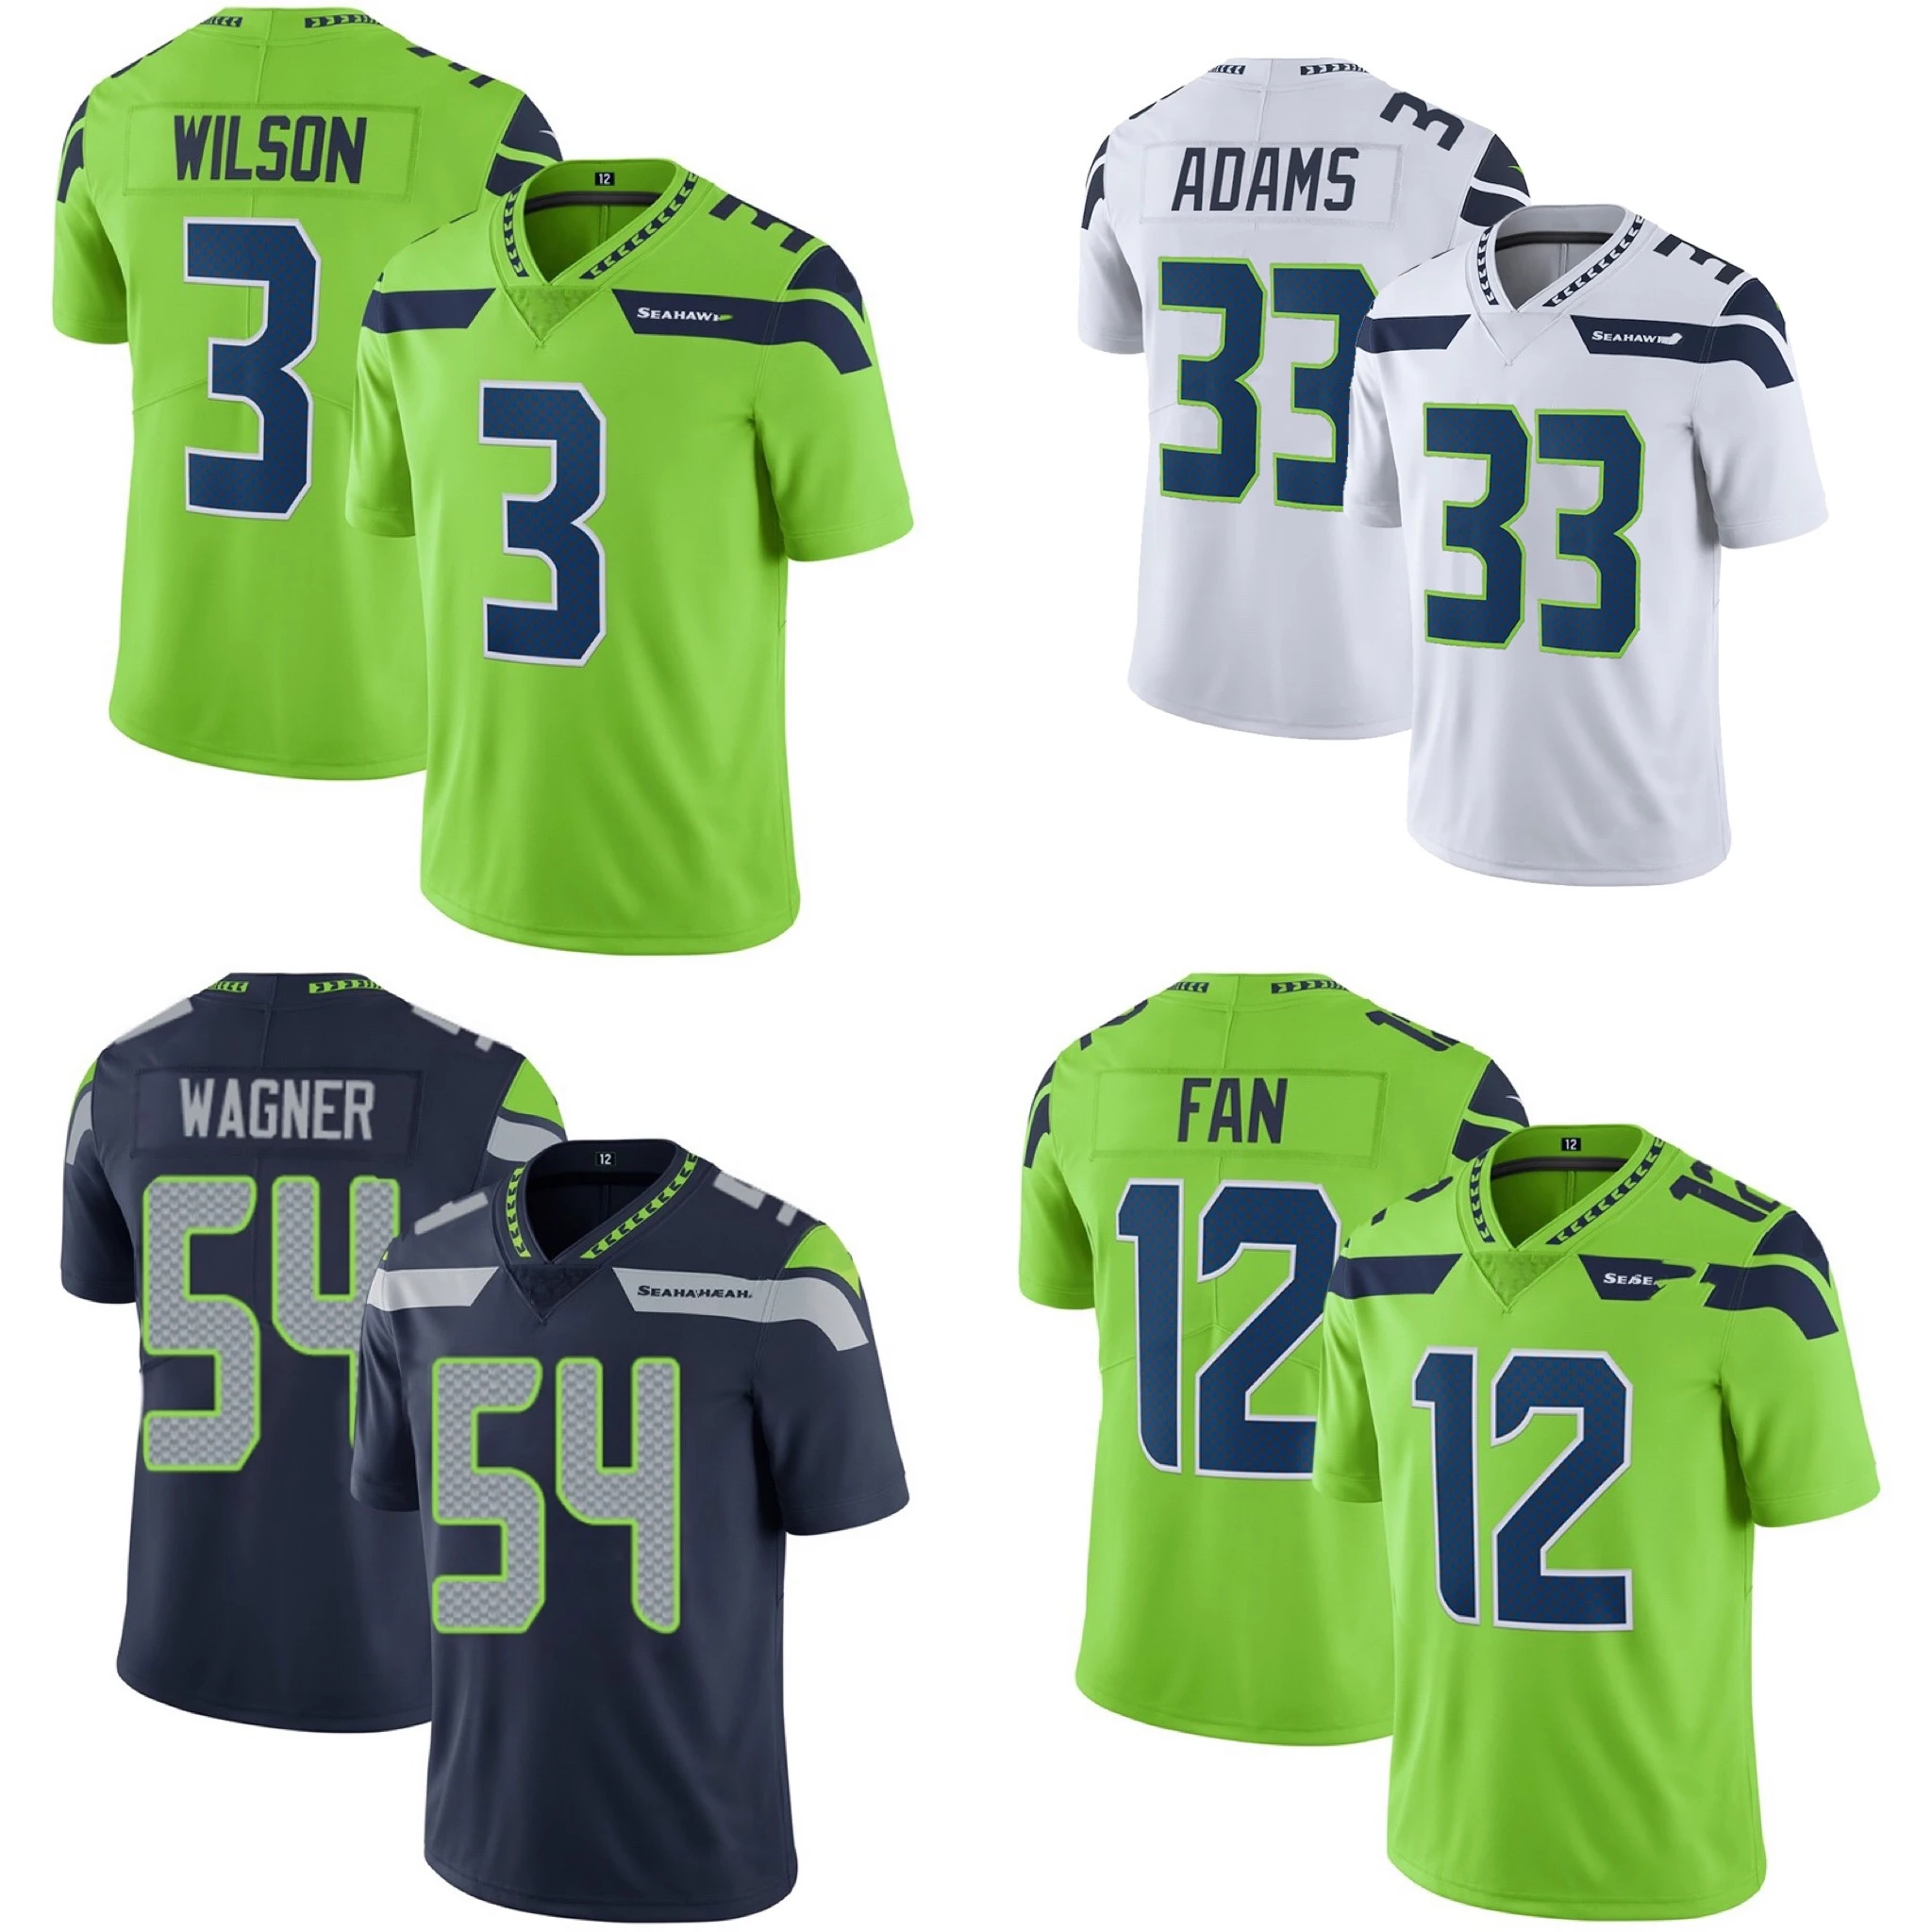 

Seattle Russell Wilson 3 # American Football Club Uniform Stitched Jersey Customize 3D Embroidery DK Metcalf 14 # Jerseys cheap